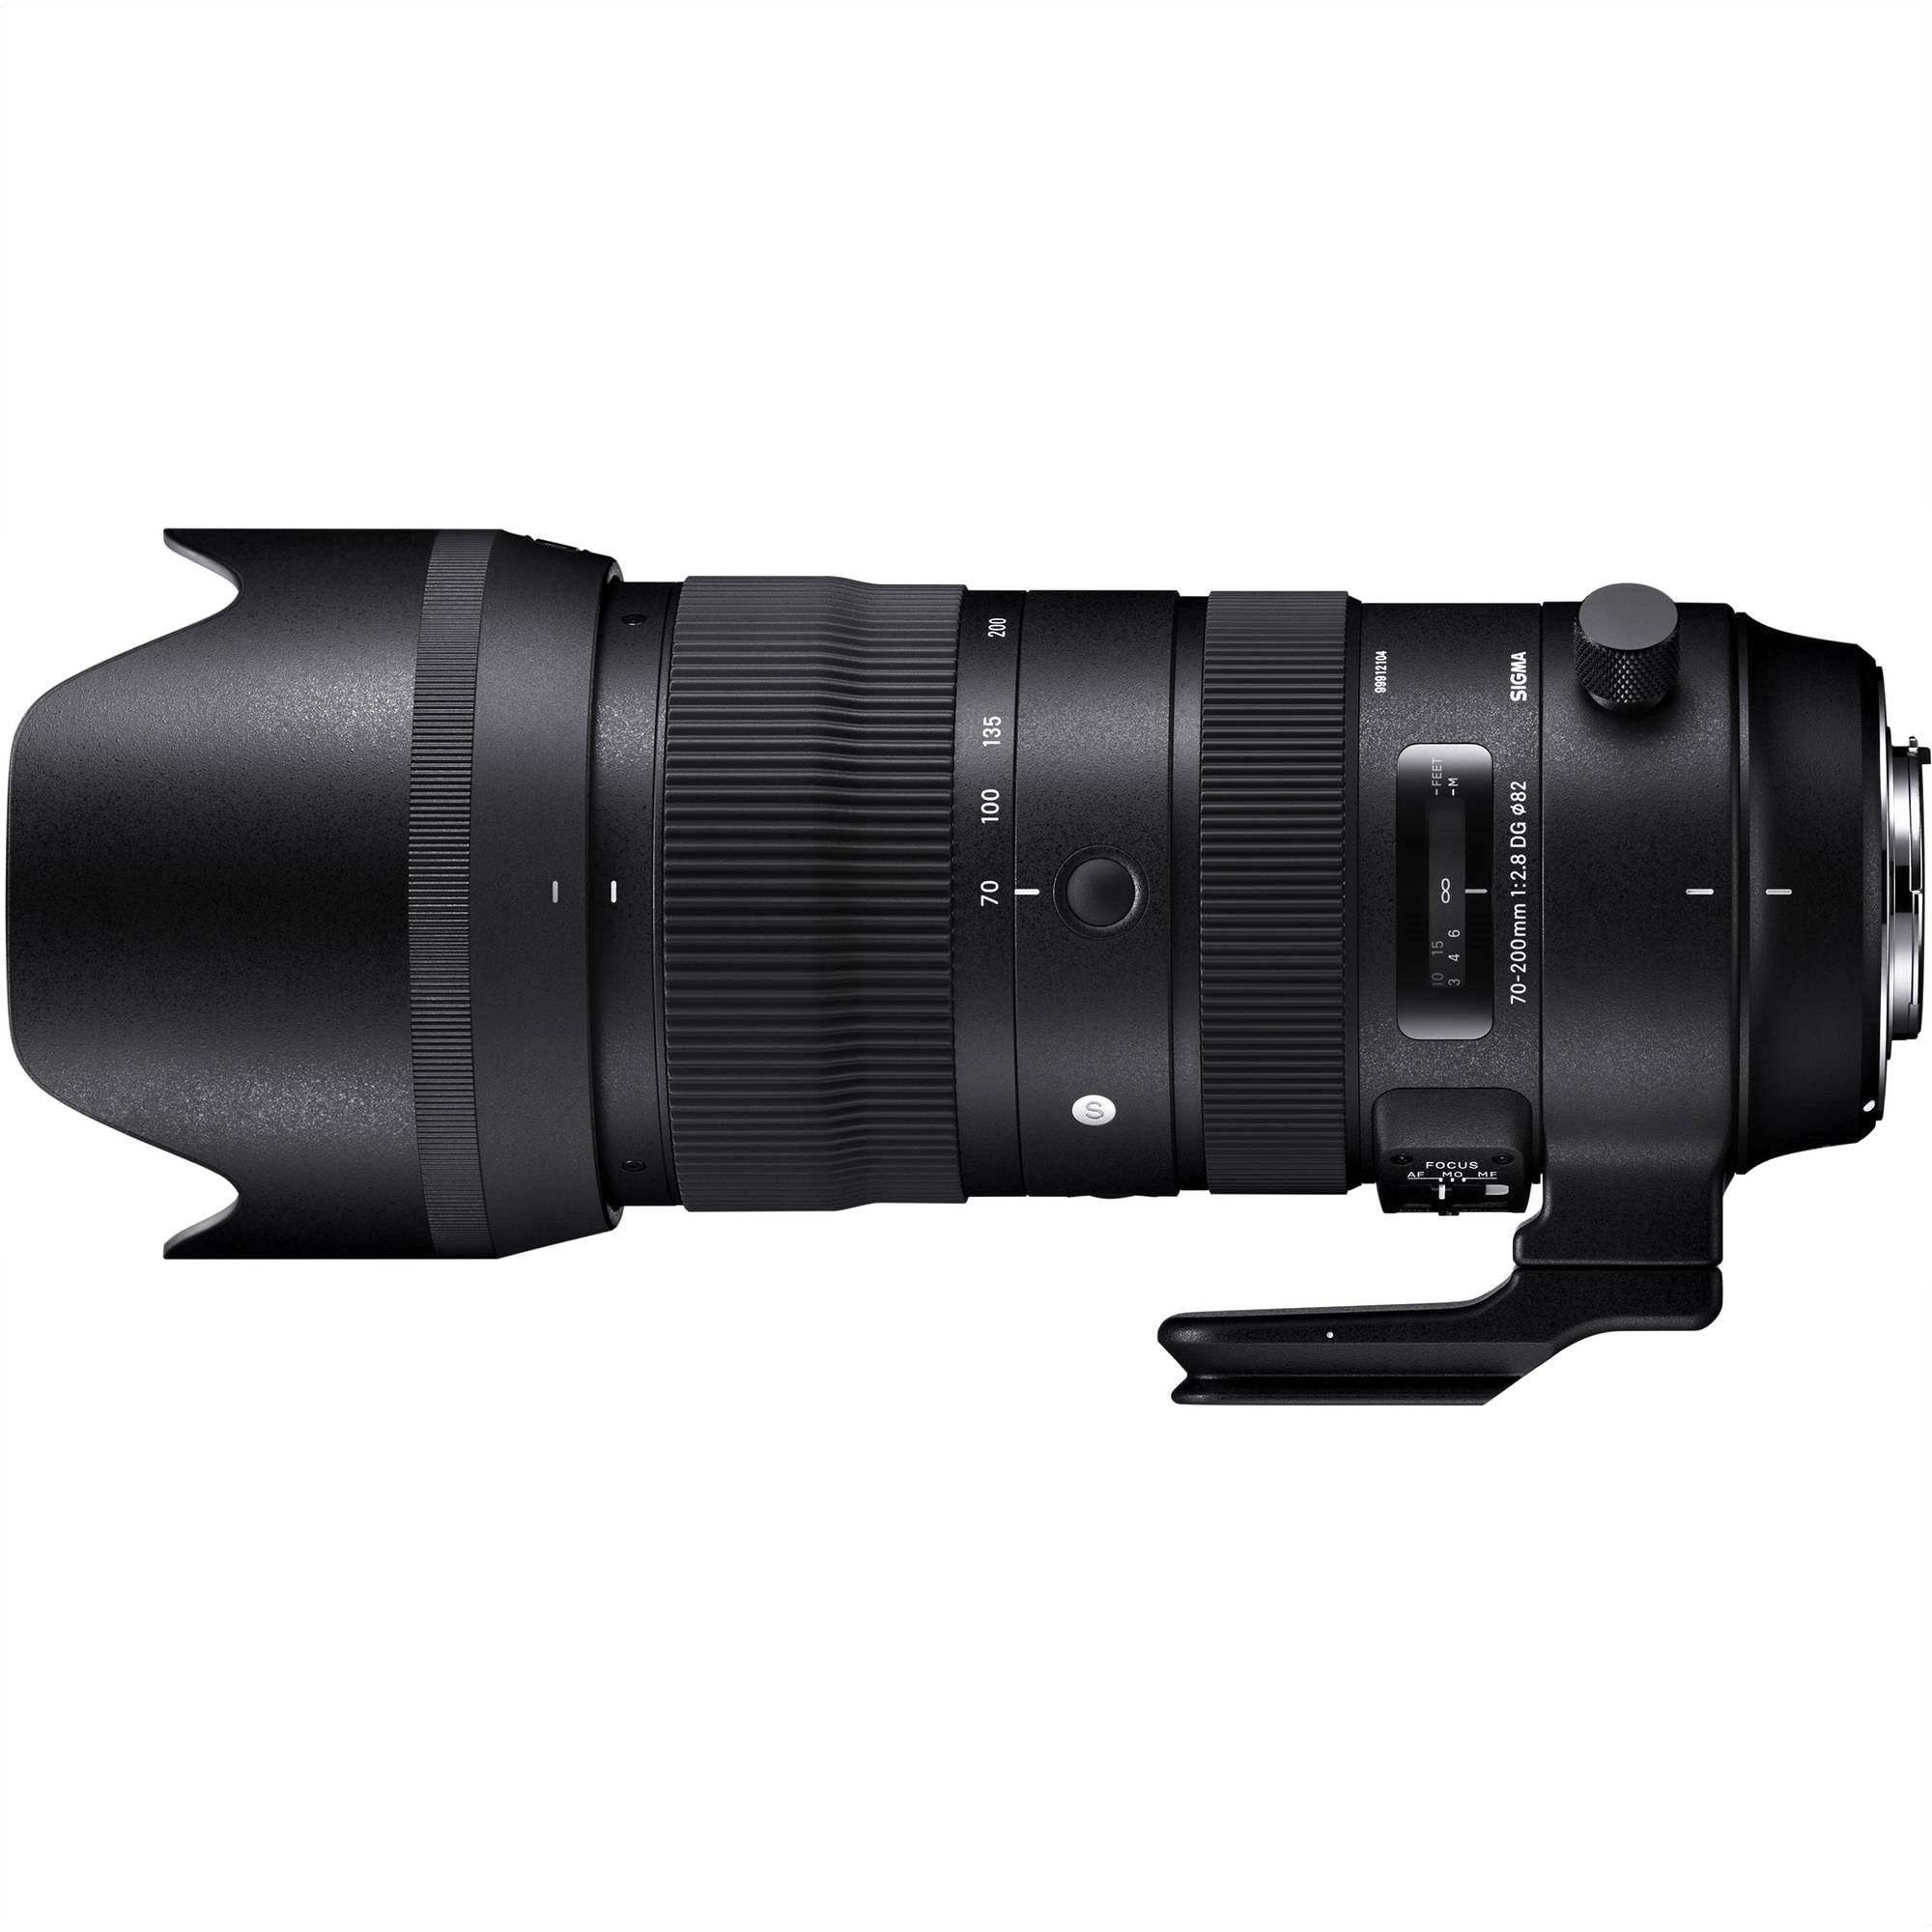 Sigma 70-200mm F2.8 DG OS HSM Sports Lens (Sigma SA Mount) with Attached Lens Hood and Tripod Socket